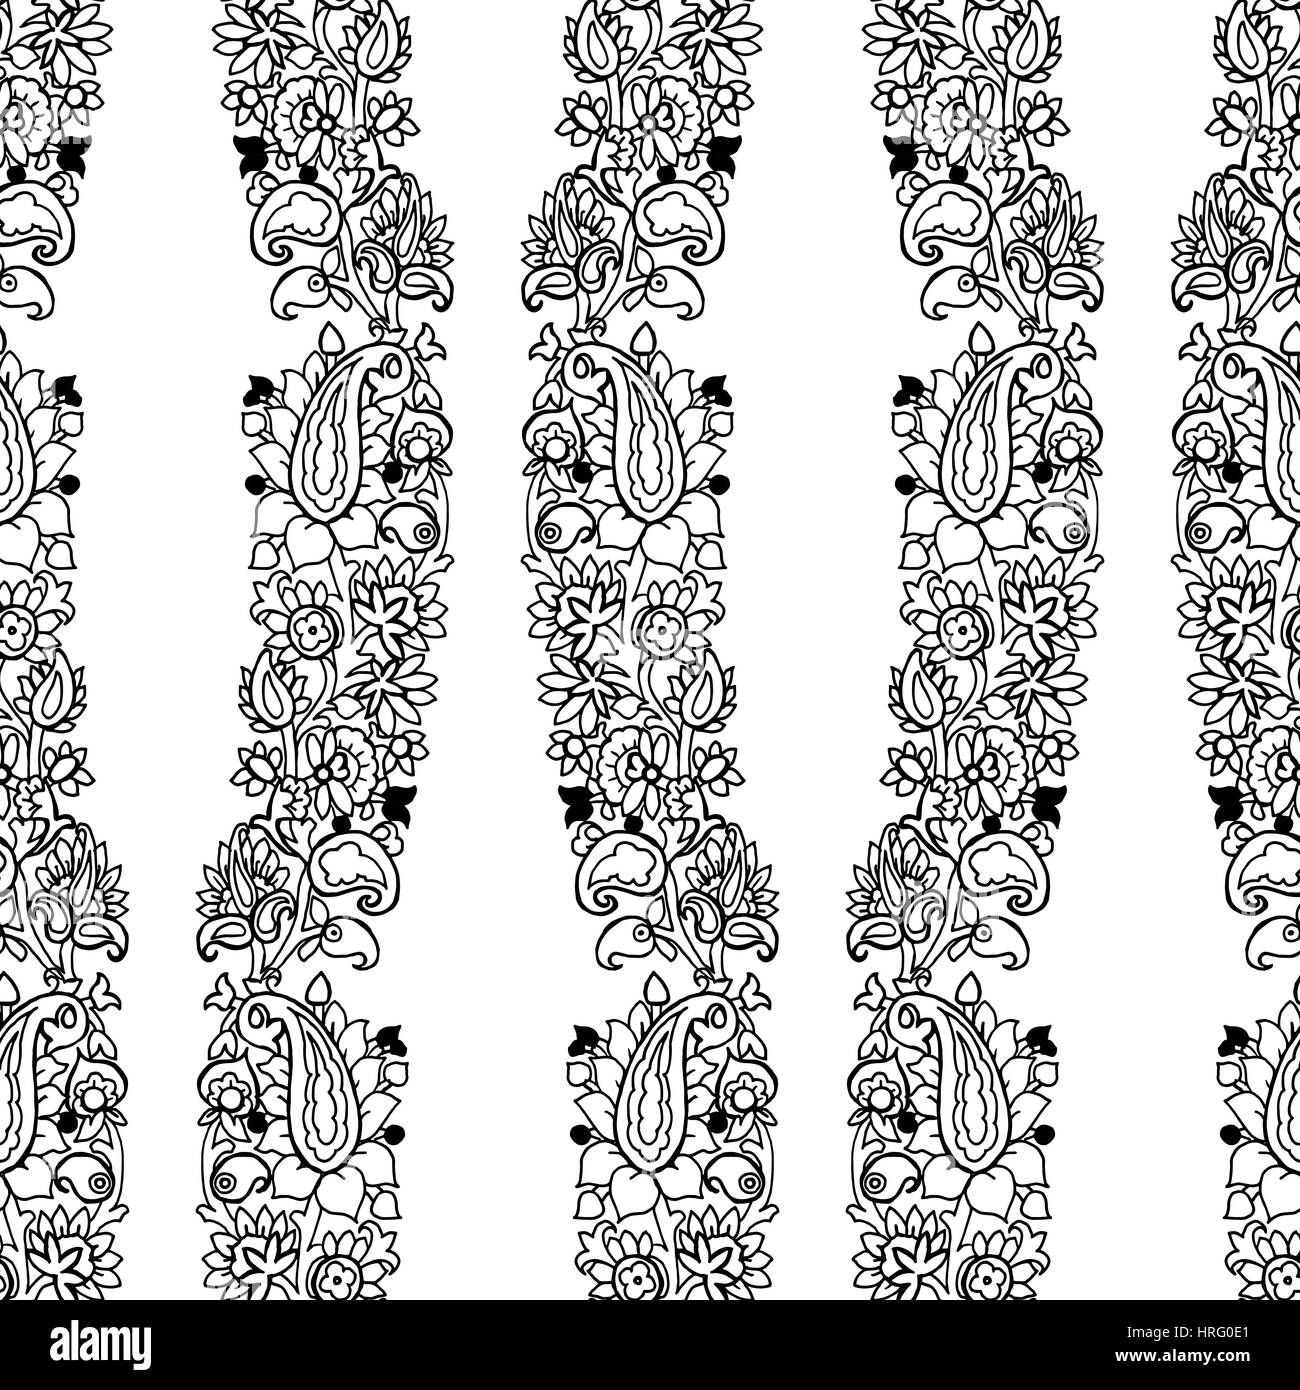 Seamless geometric vector paisley pattern. Ethnic floral motif, primitive oriental elements, vertical waves layout. Black outlines on white background Stock Vector